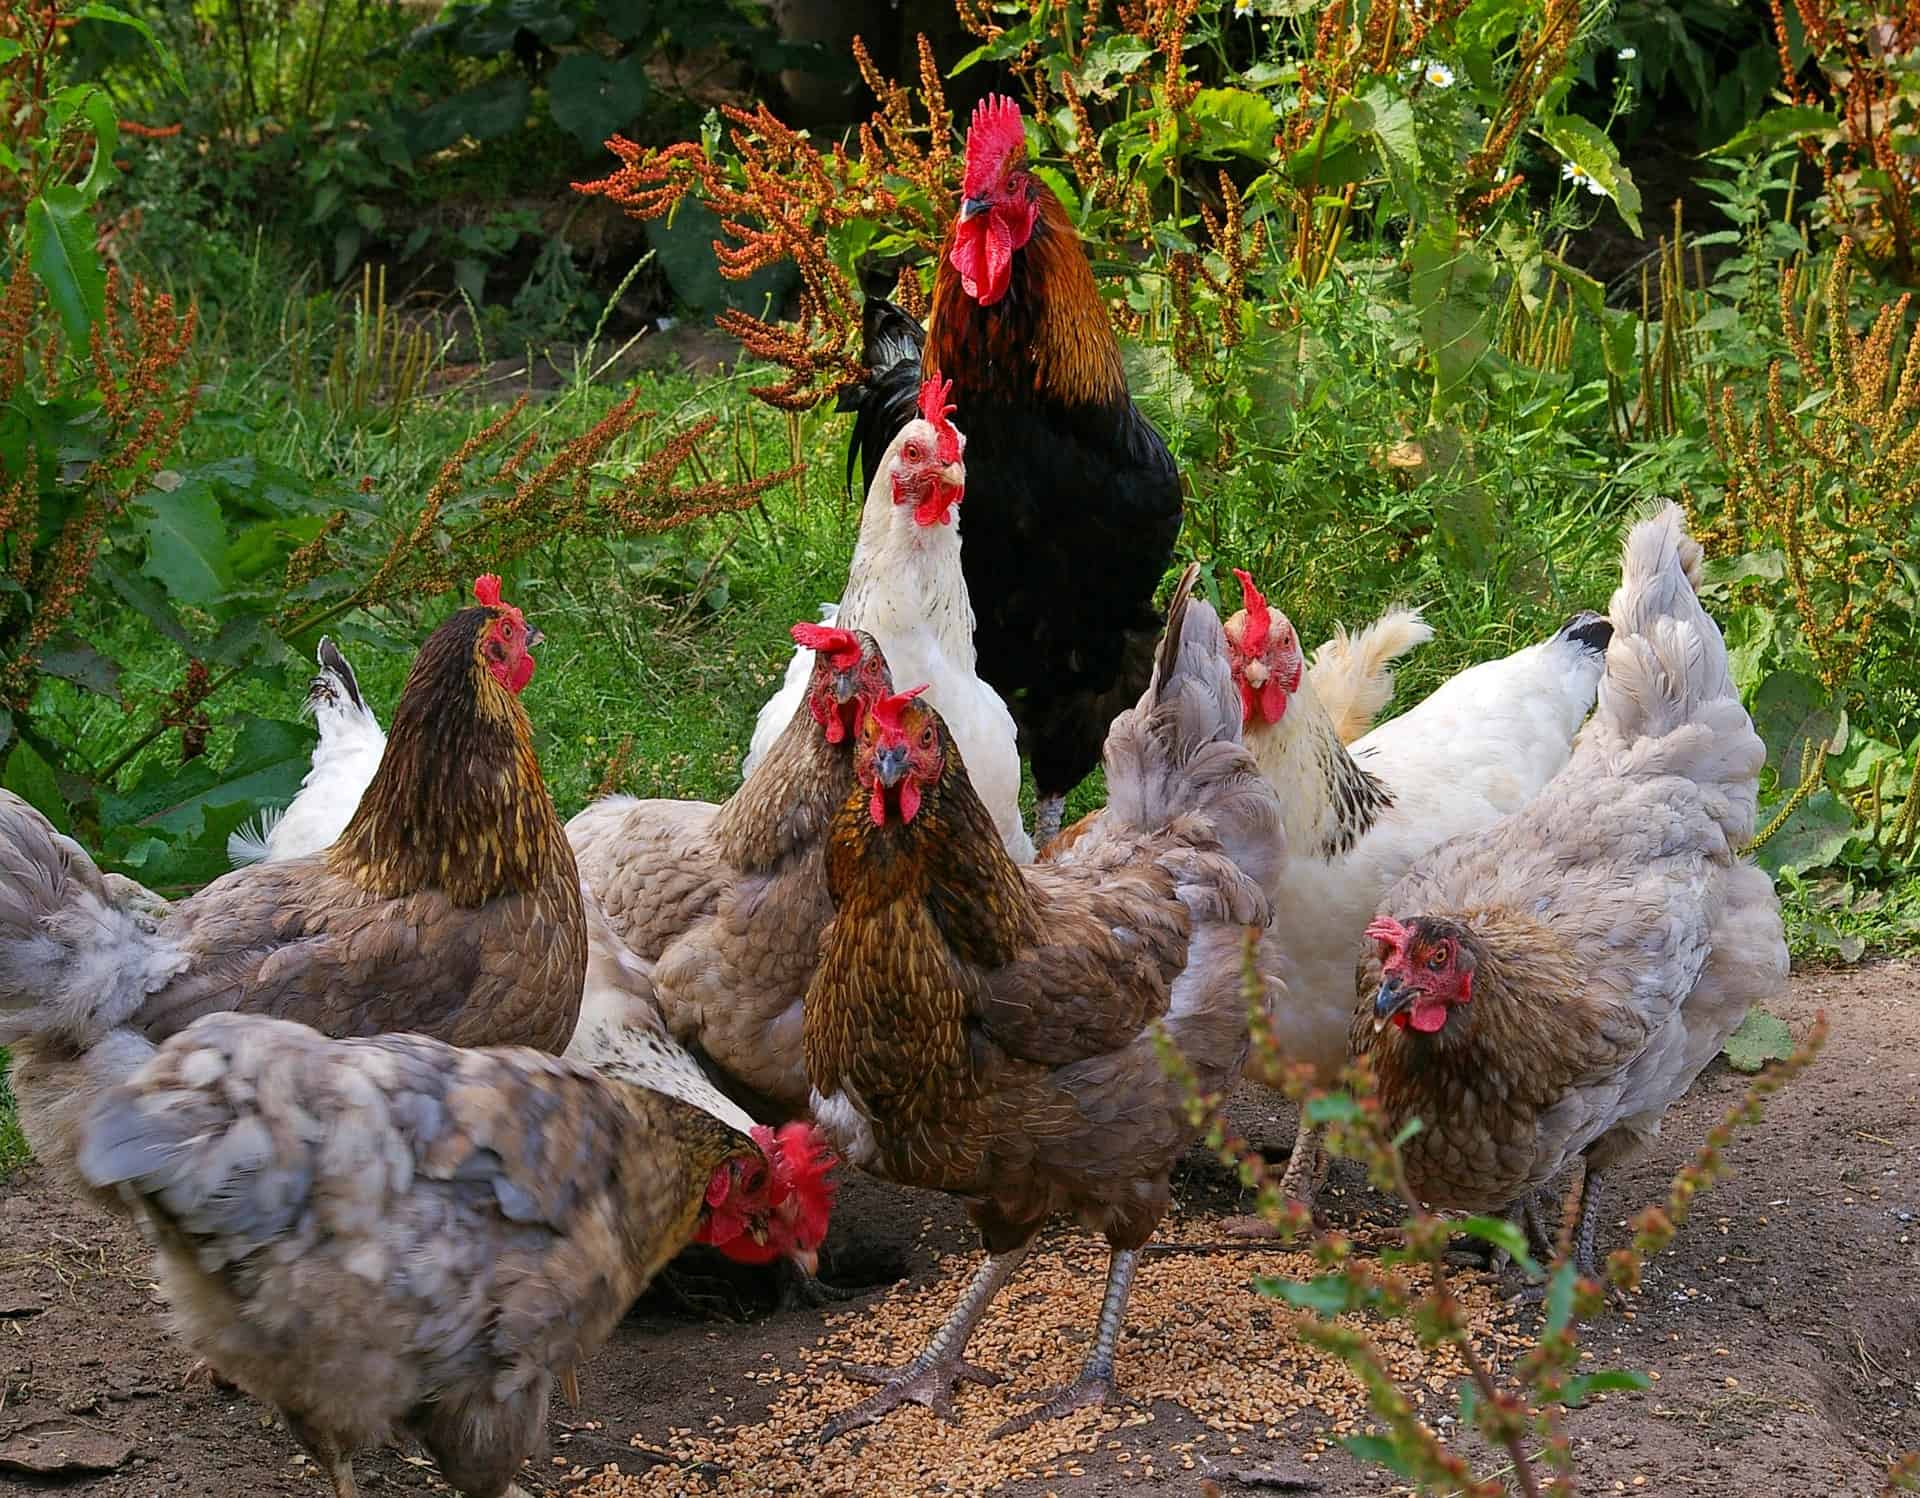 flock of 7 chickens and 1 rooster